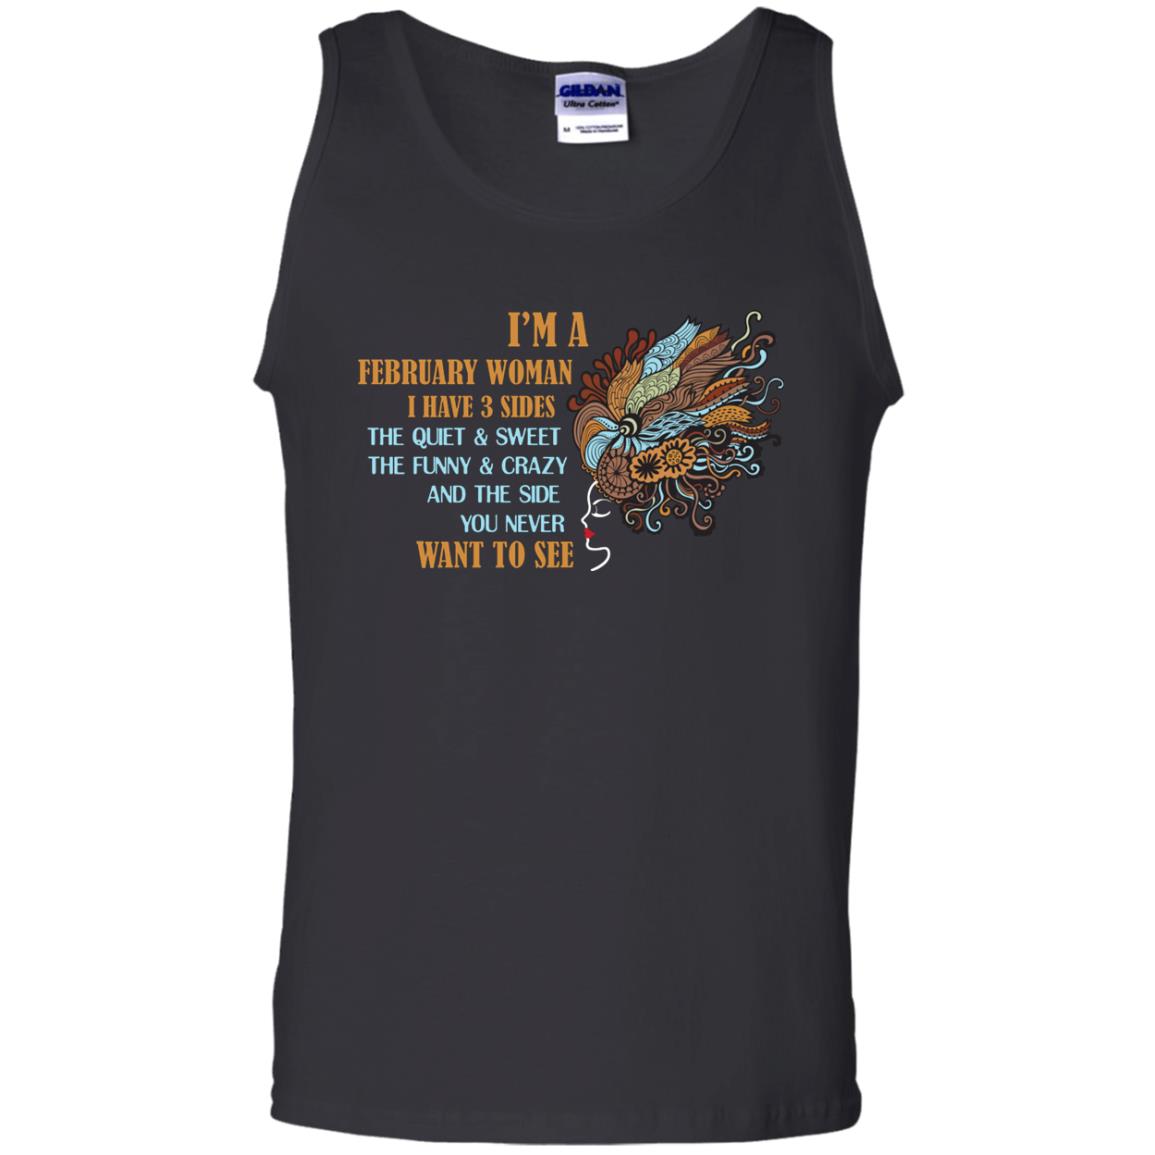 I'm A February Woman I Have 3 Sides The Quite And Sweet The Funny And Crazy And The Side You Never Want To SeeG220 Gildan 100% Cotton Tank Top